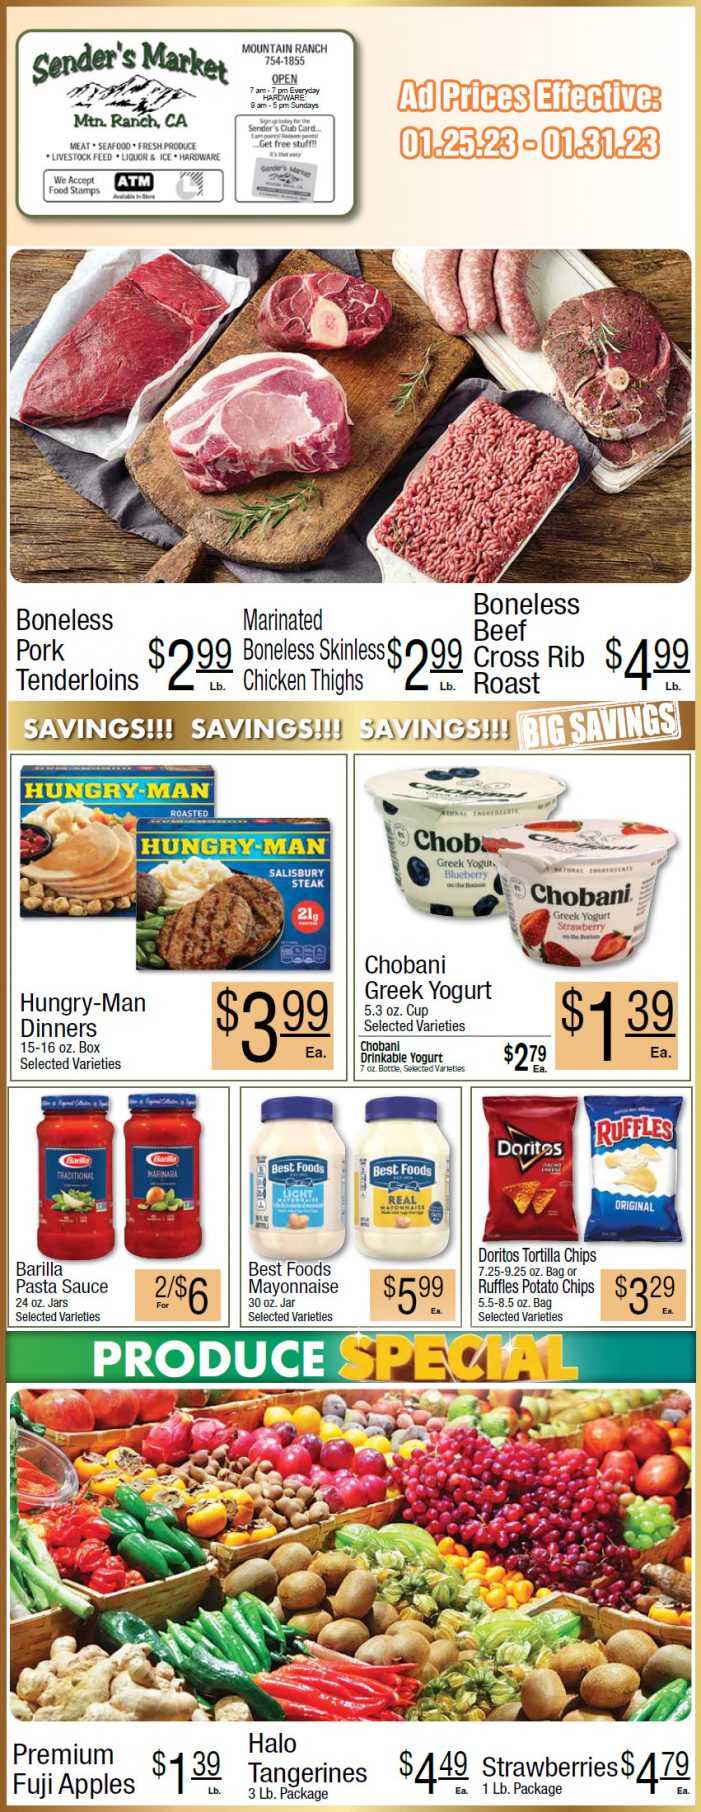 Sender’s Market Weekly Ad & Grocery Specials Jan 25 – 31st! Shop Local & Save!!